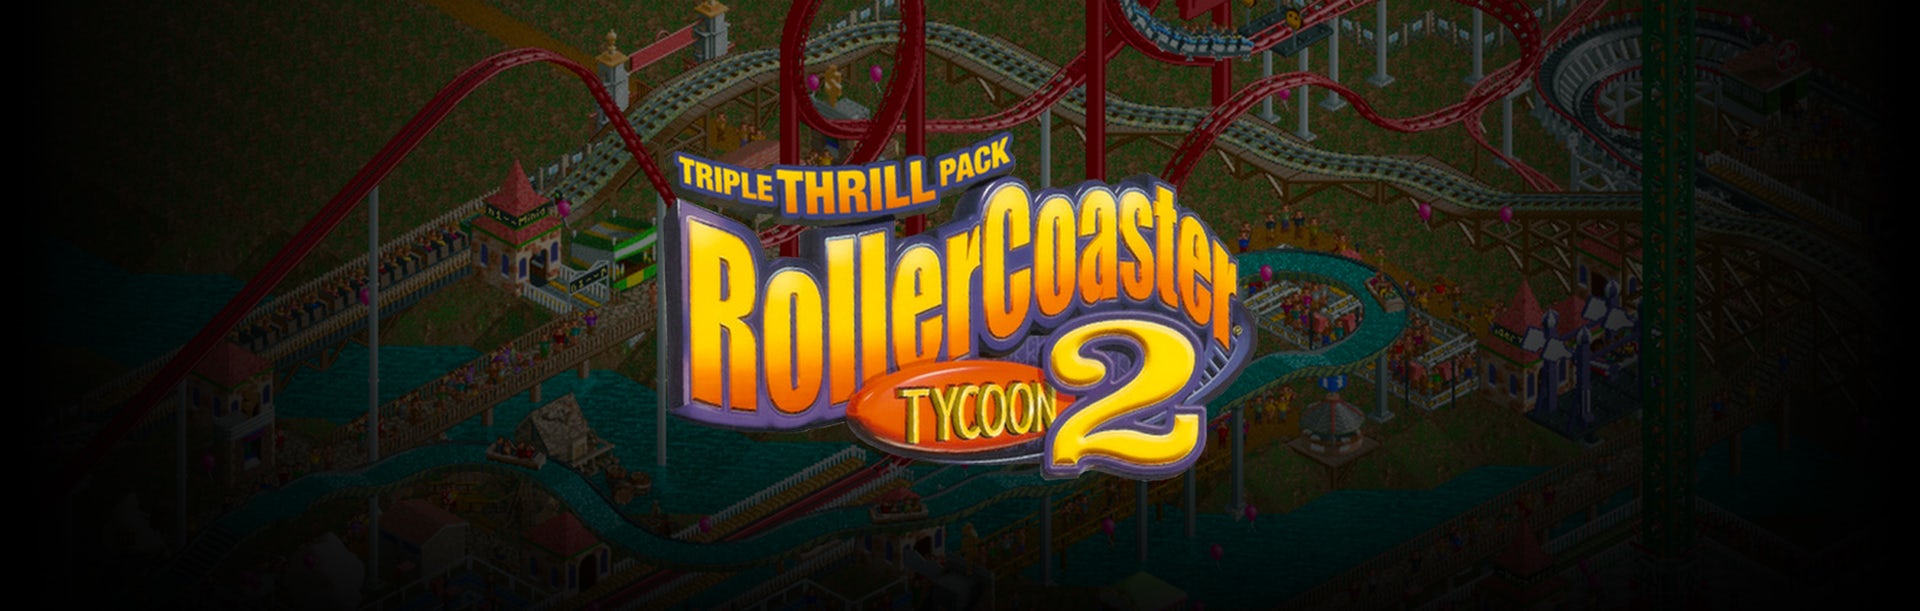 Rollercoaster Tycoon 2 Triple Thrill Pack Pc Digital Download